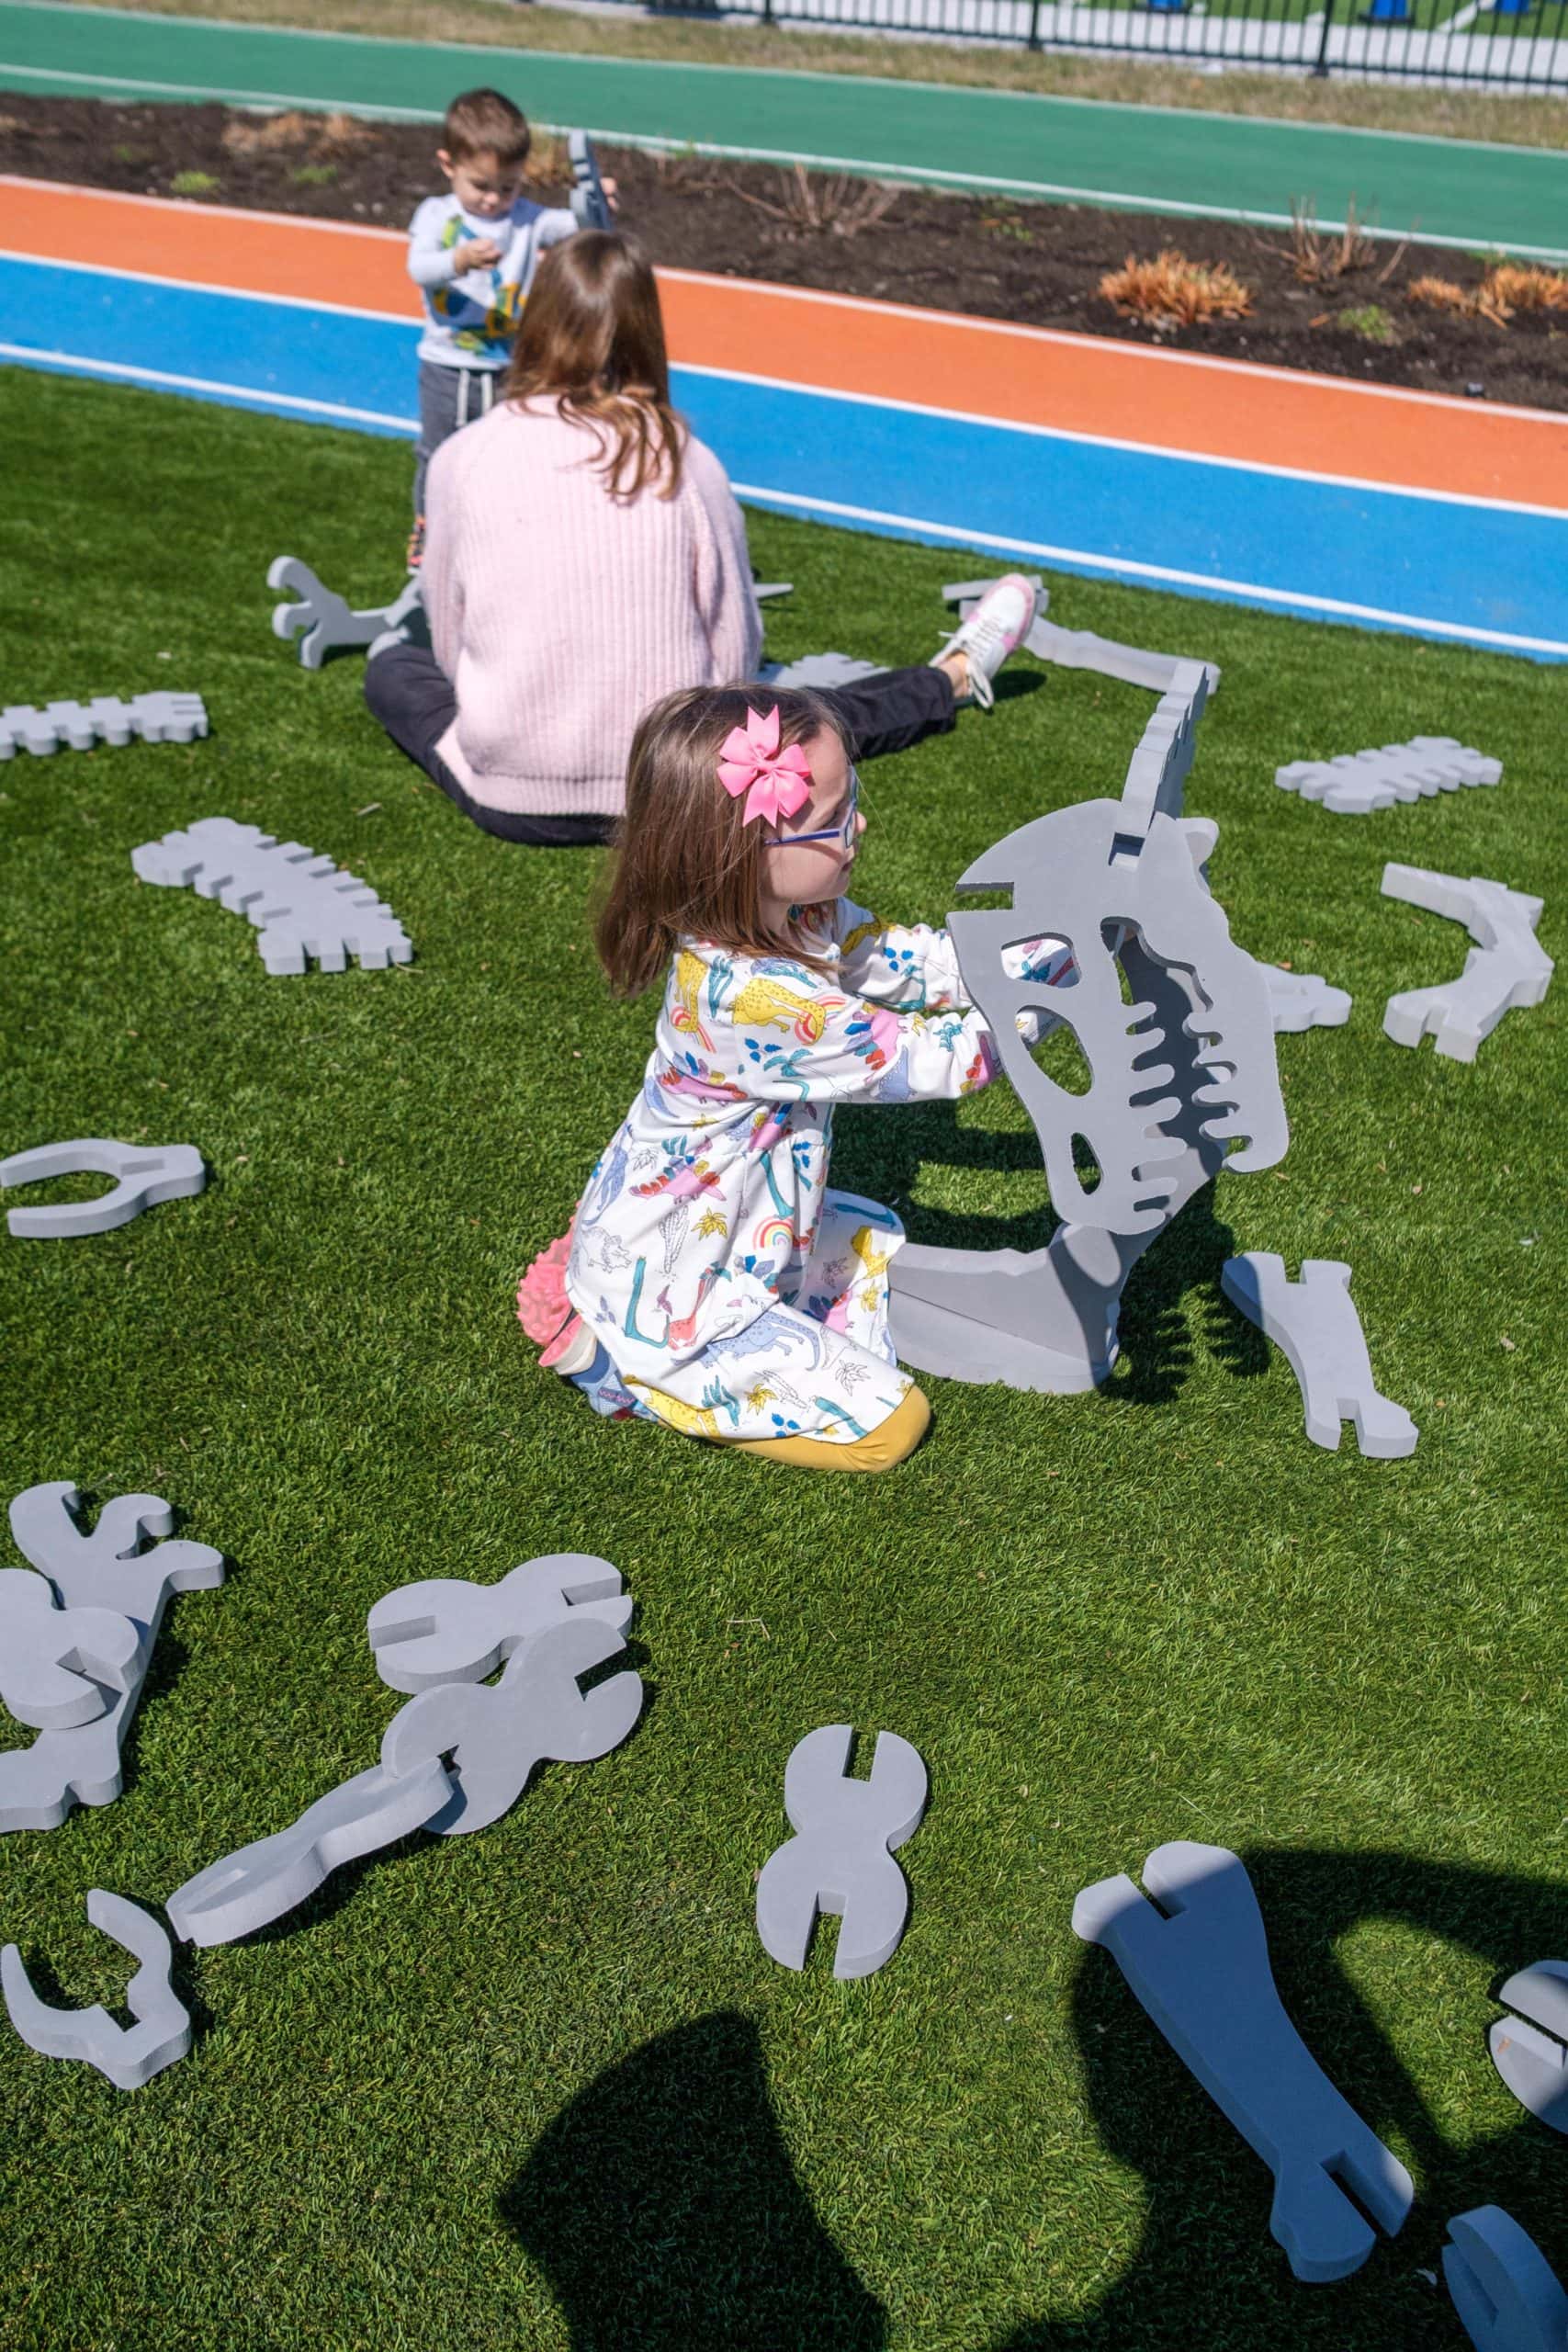 Kids building foam dinosaurs outdoors at the Children's Museum Of Indianapolis.